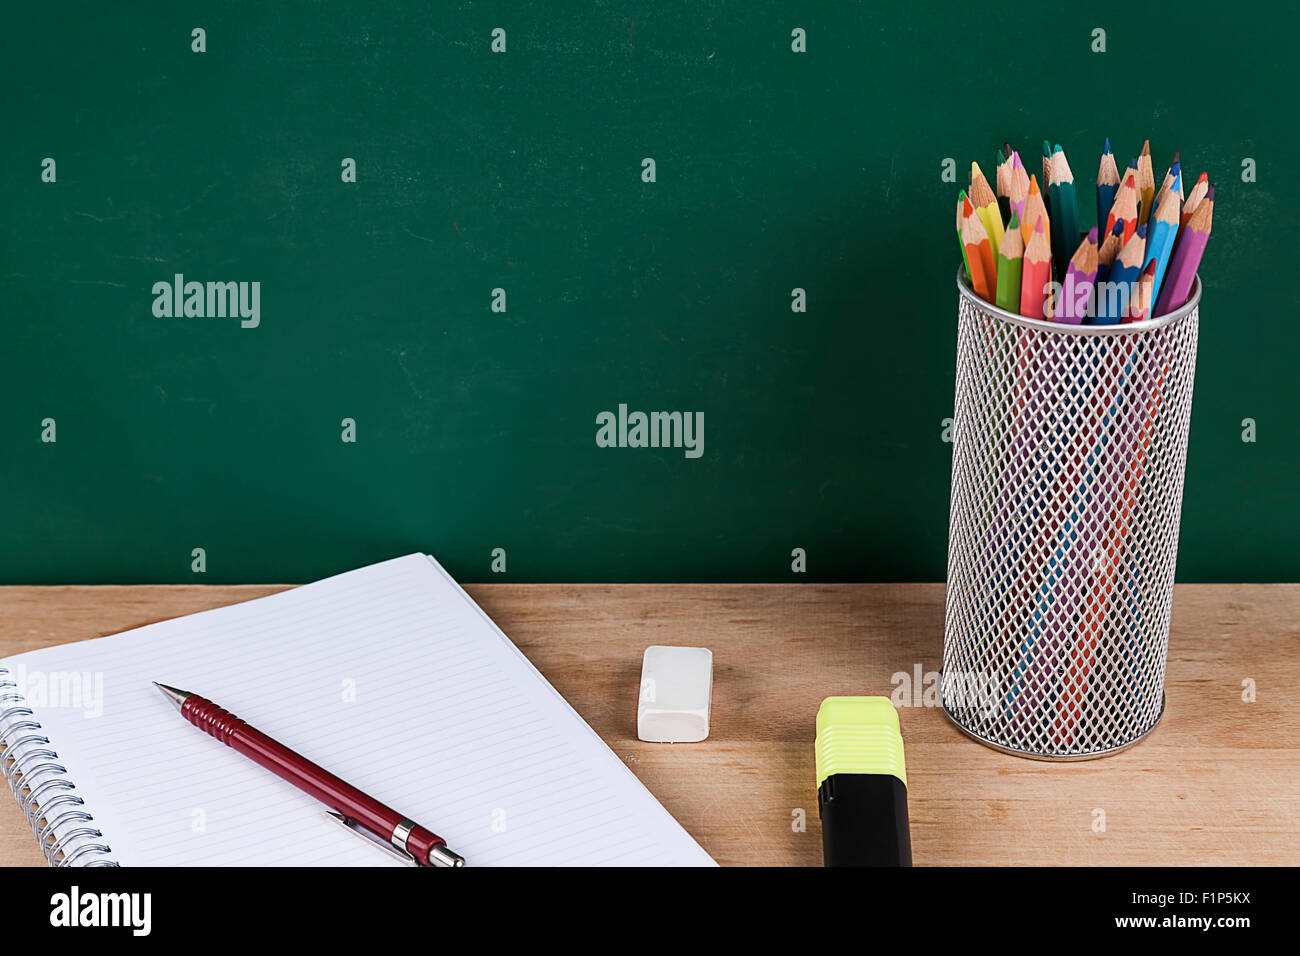 Colored pencils on green chalkboard Stock Photo